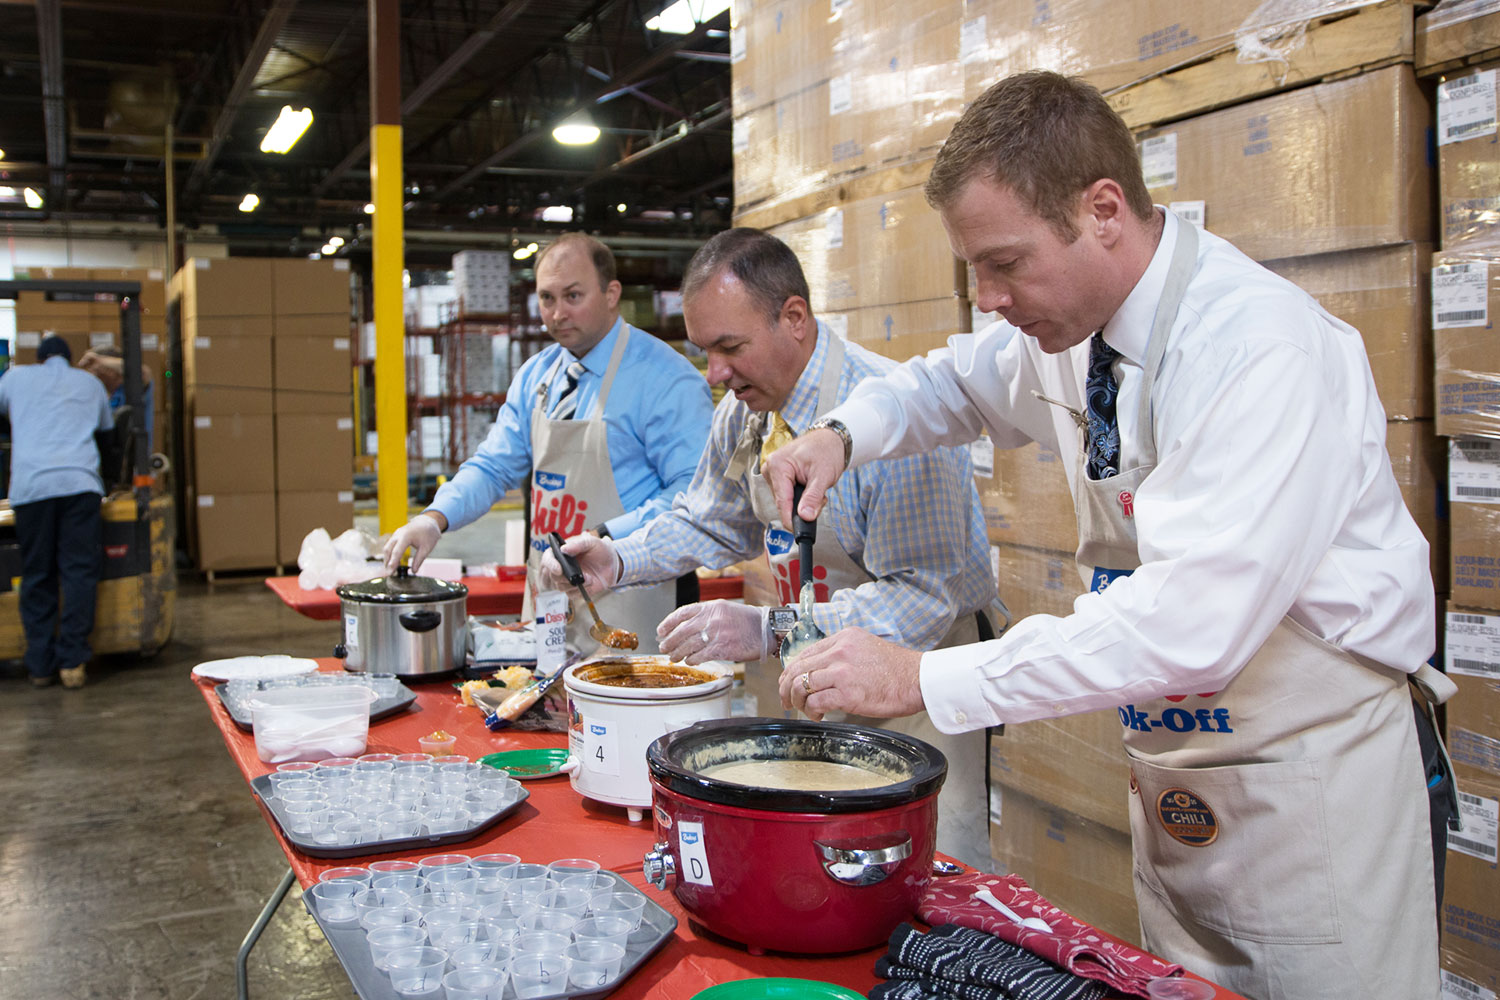 Buckeye employees scooping out chili from crockpots.